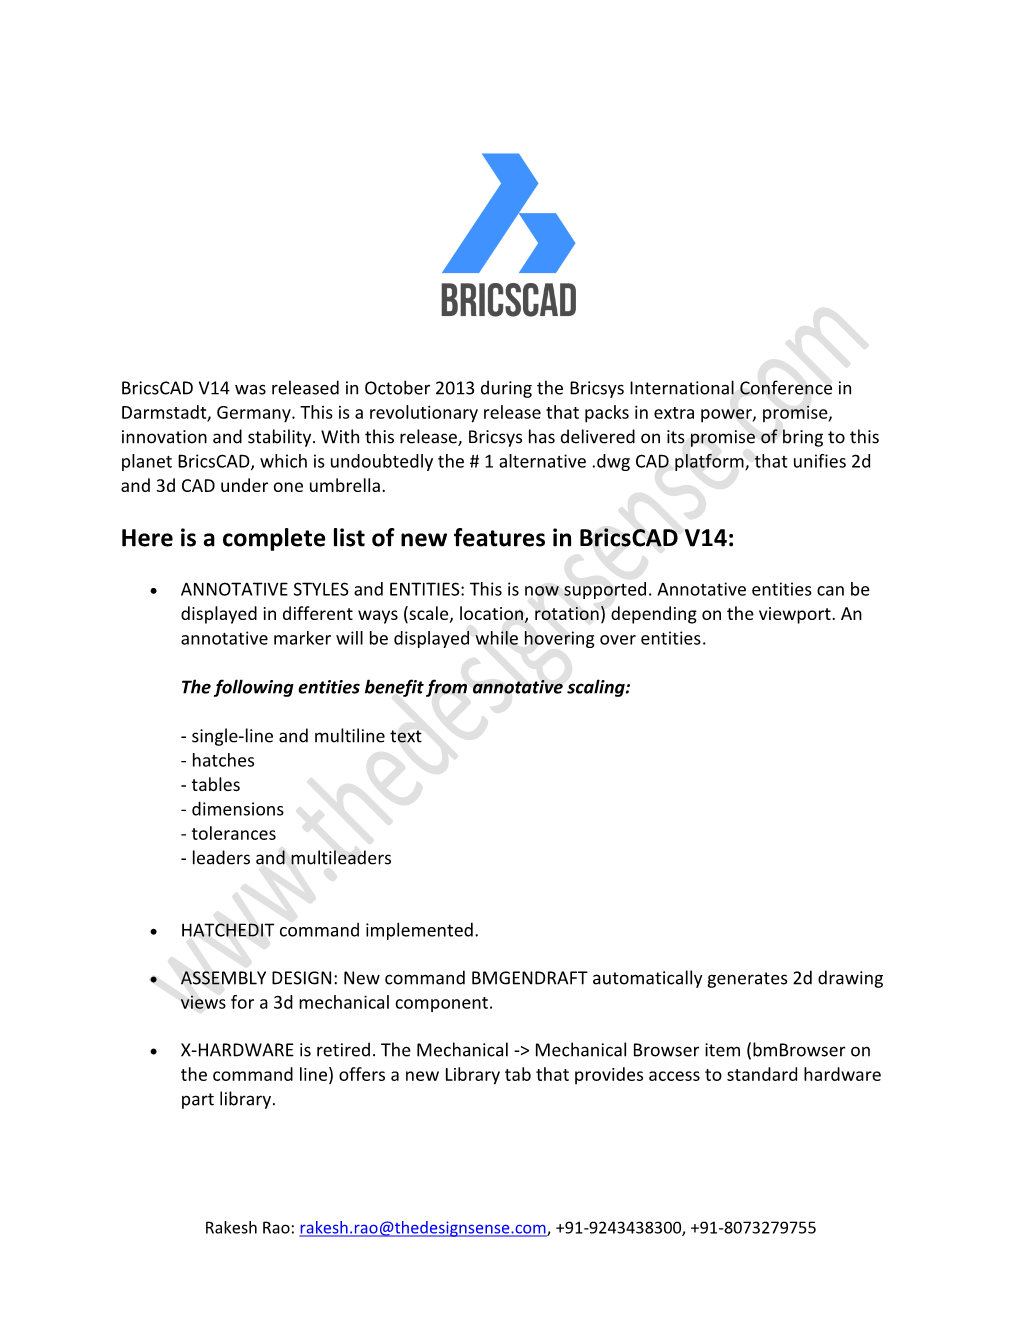 Here Is a Complete List of New Features in Bricscad V14